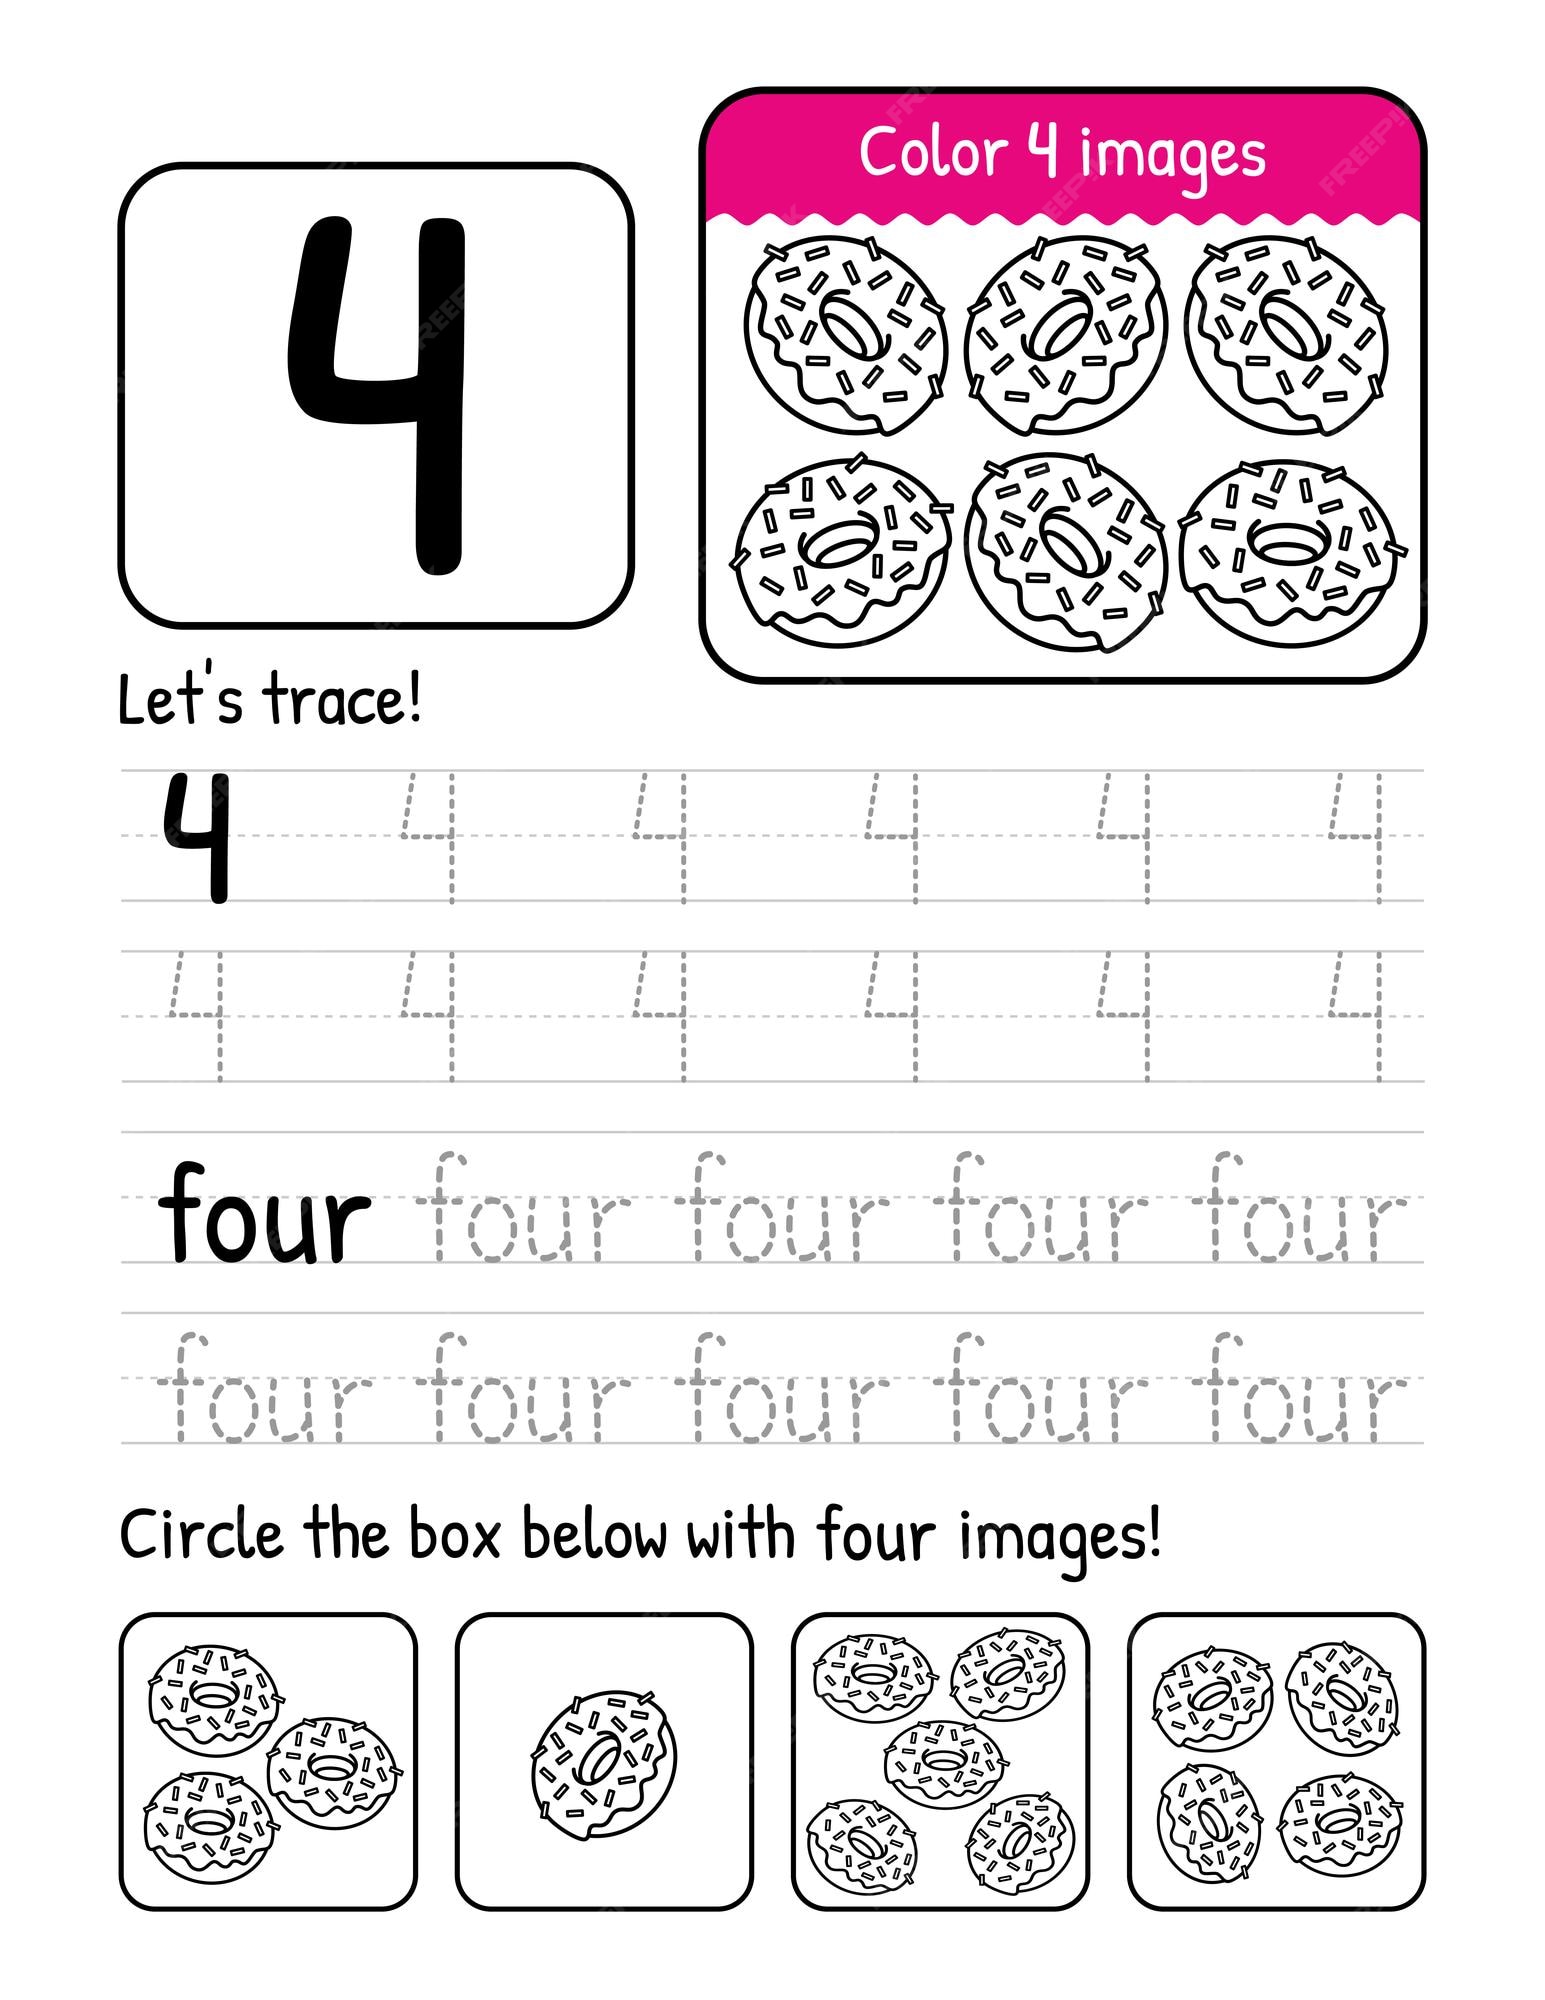 Premium vector word and number four tracing book interior worksheet page with coloring and counting activities